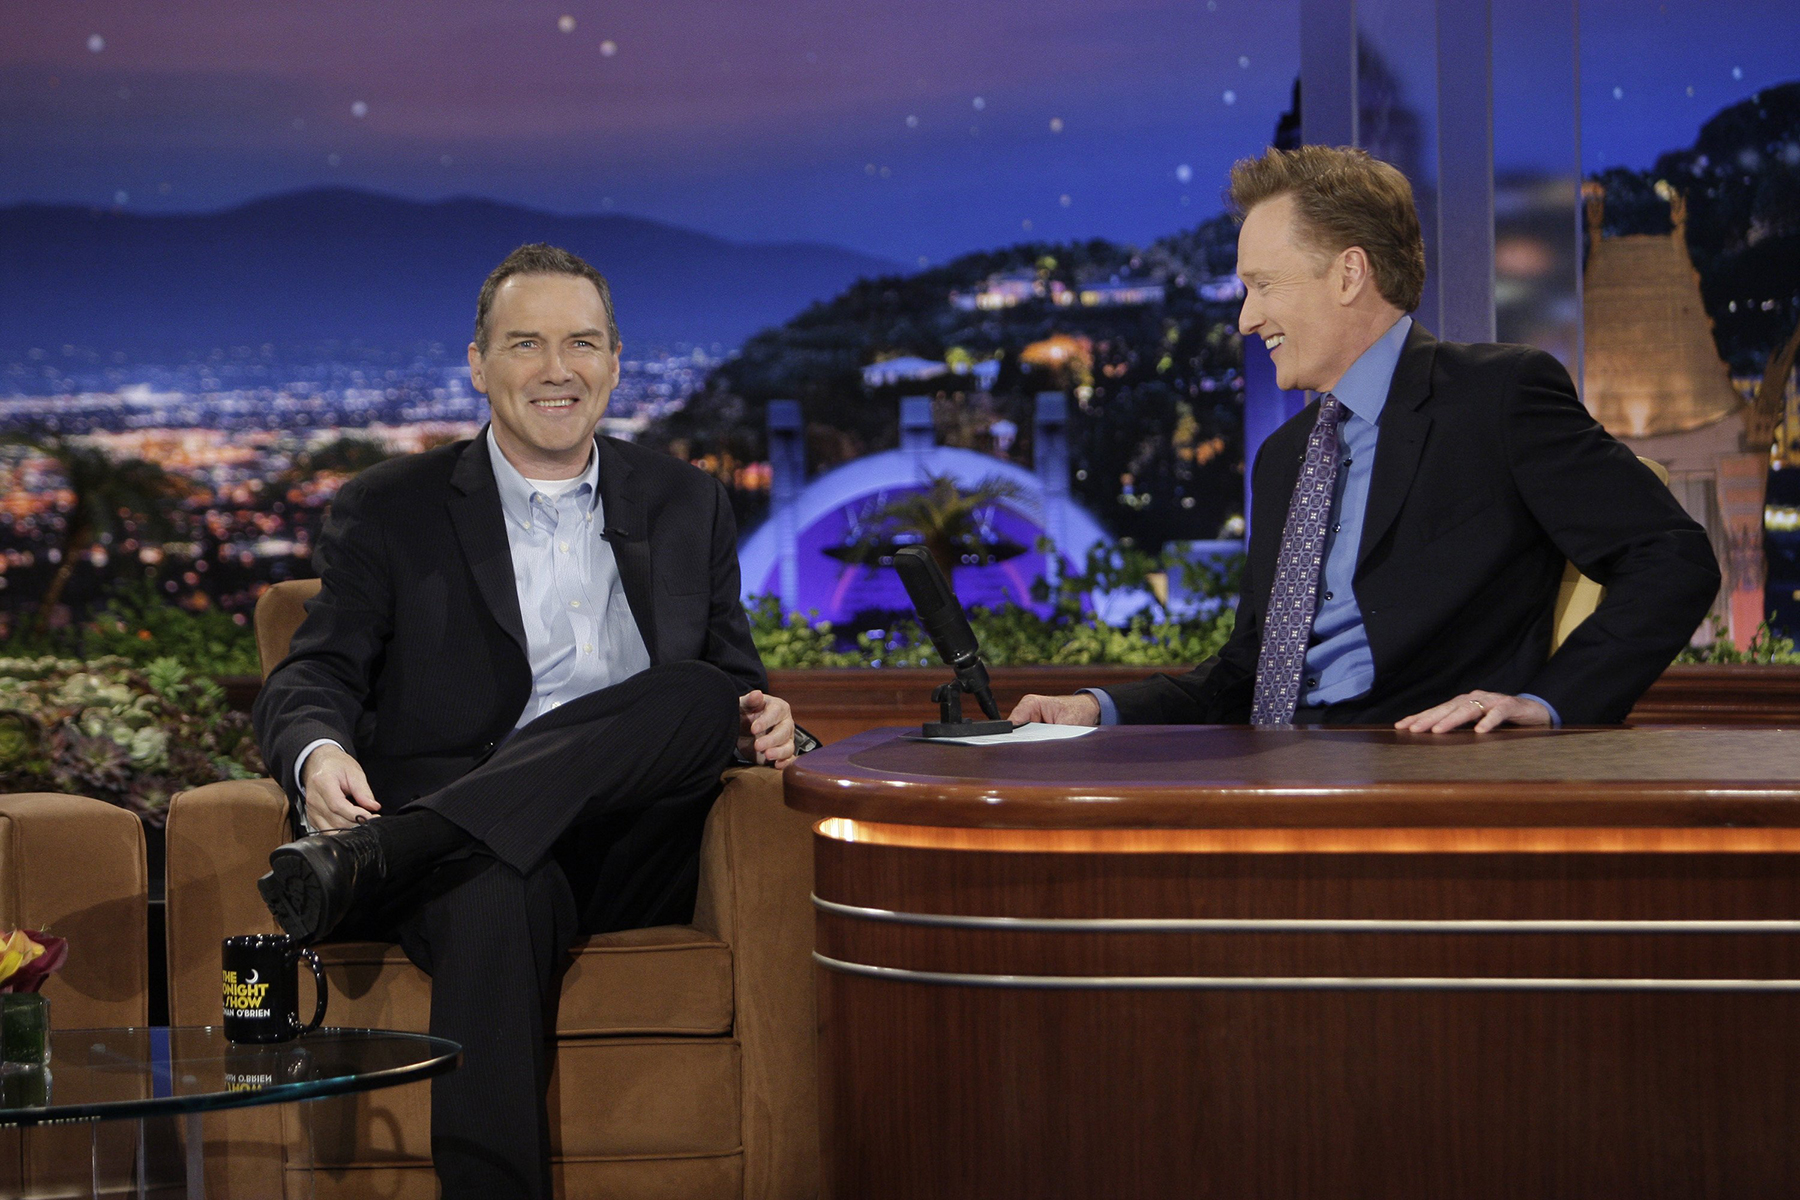 THE TONIGHT SHOW WITH CONAN O’BRIEN -- Episode 9 -- Air Date 06/11/2009 -- Pictured: (l-r) Comedian Norm Macdonald during an interview with host Conan O'Brien on June 11, 2009 -- Photo by: Paul Drinkwater/NBCU Photo Bank